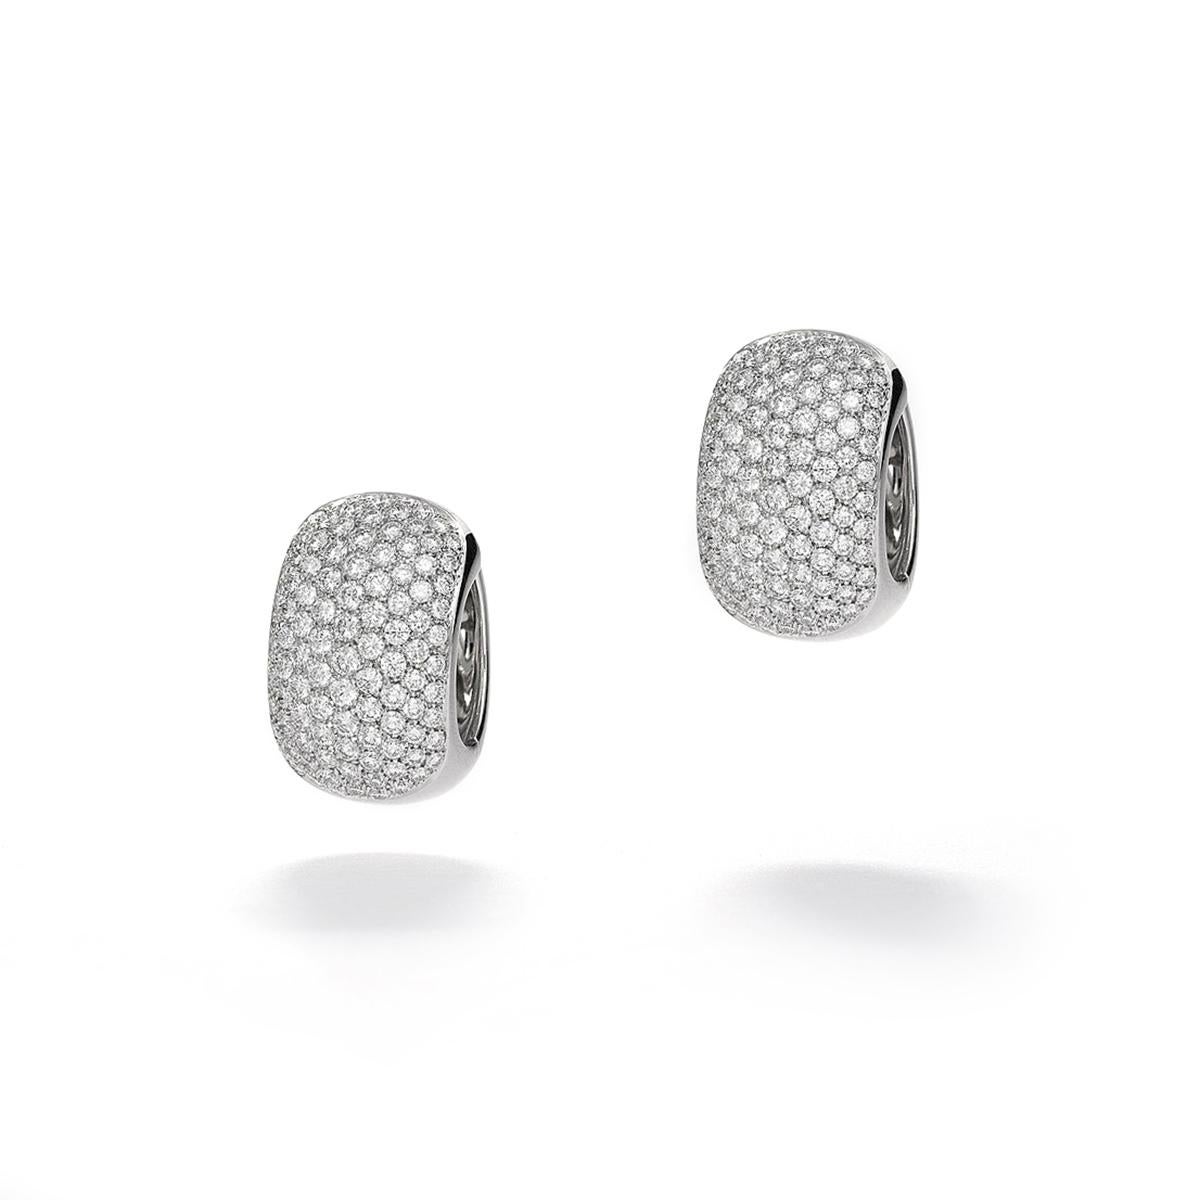 Allow yourself to be swept away by the sheer brilliance and elegance of our stunning Earrings in 18kt White Gold. These captivating earrings are a true testament to the beauty that can be achieved through exquisite craftsmanship and the sparkle of